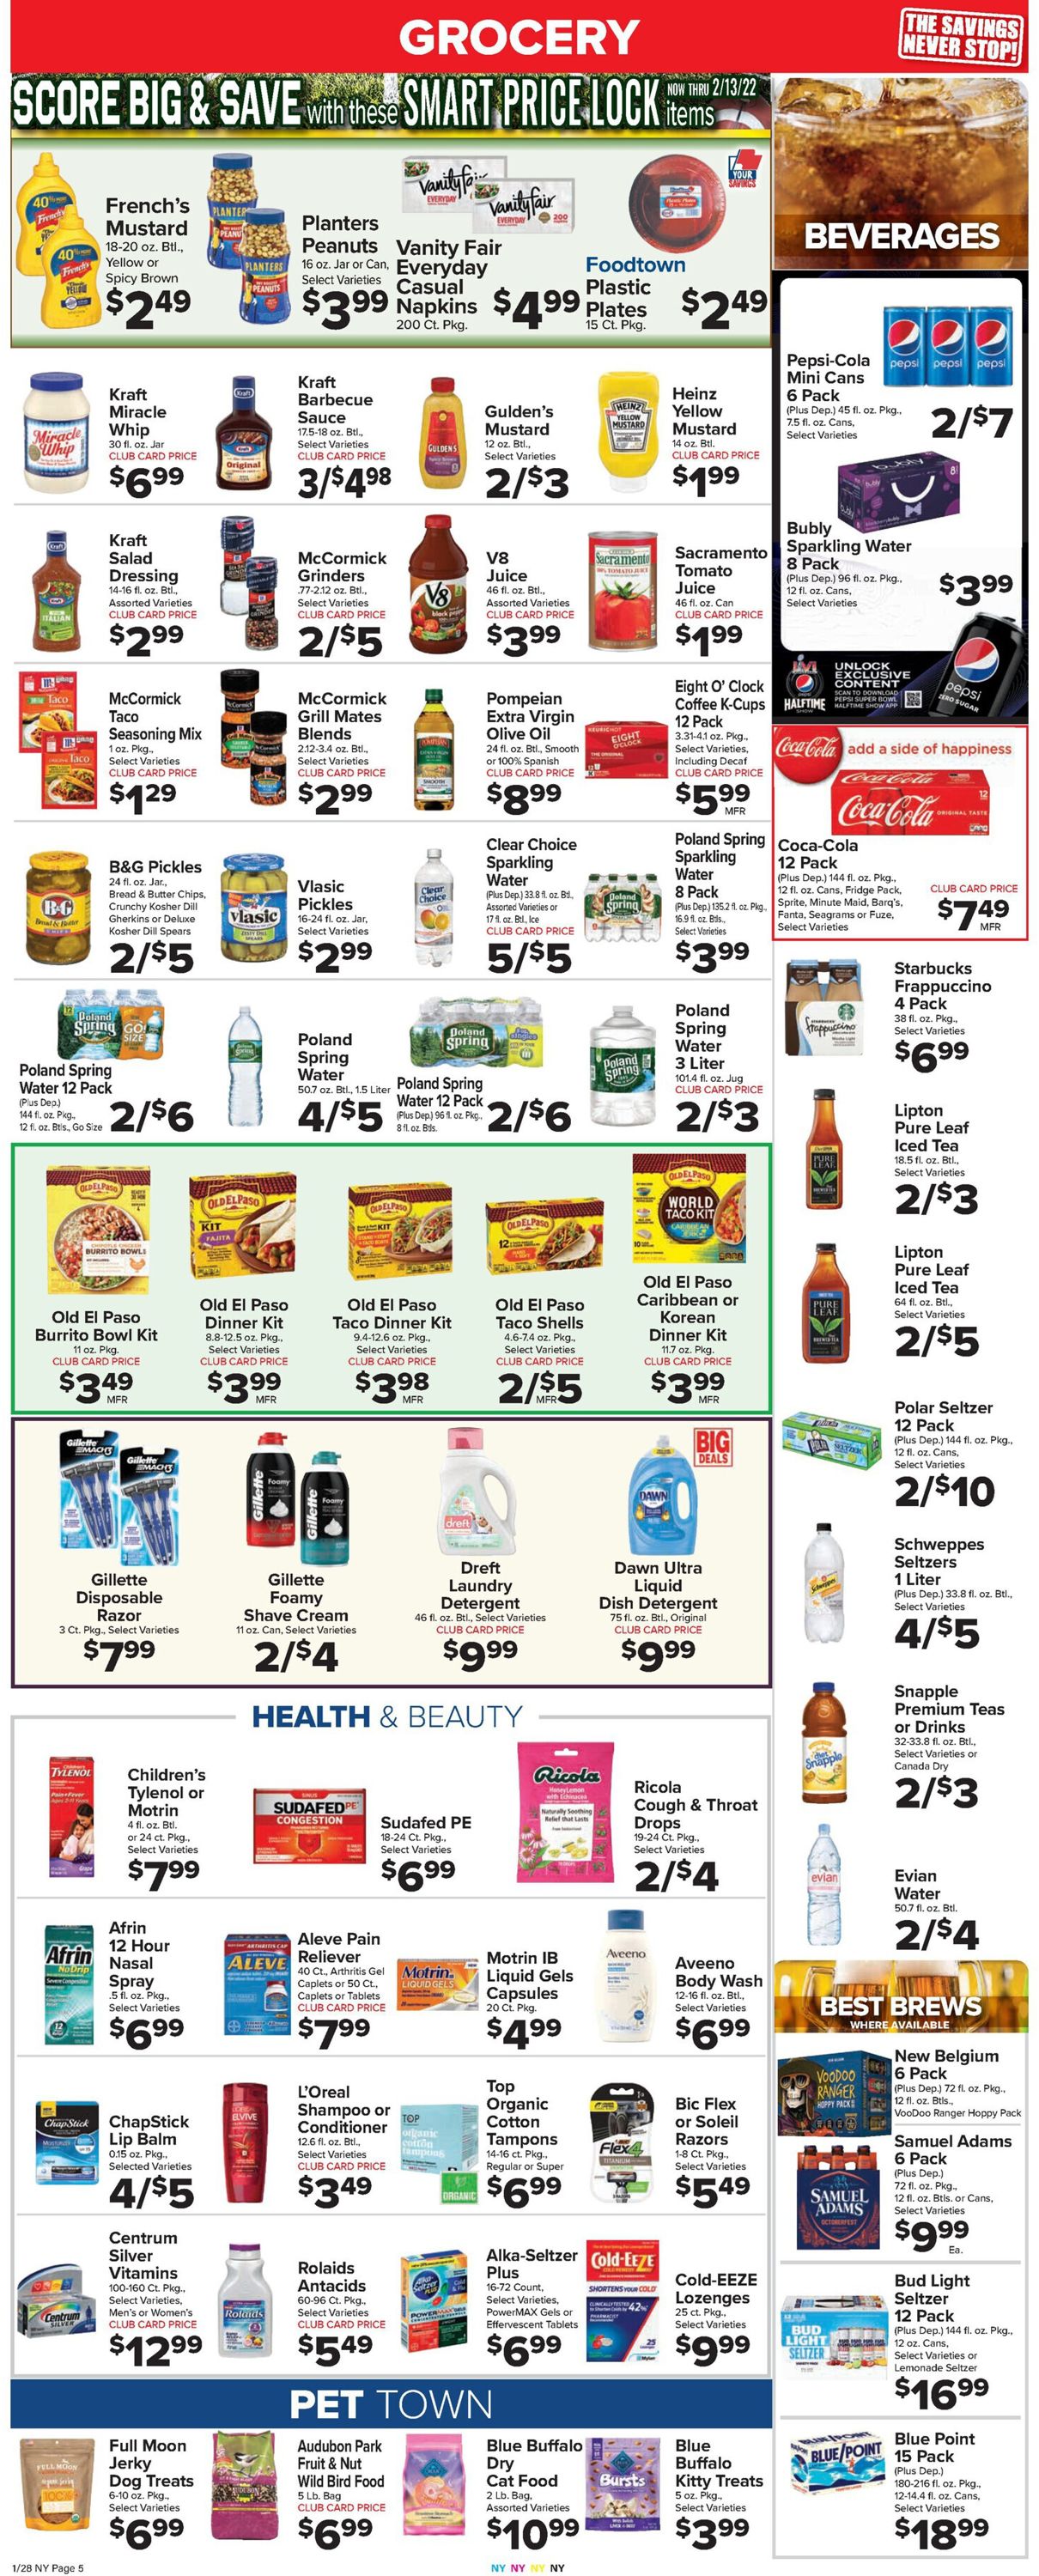 Foodtown Ad from 01/28/2022